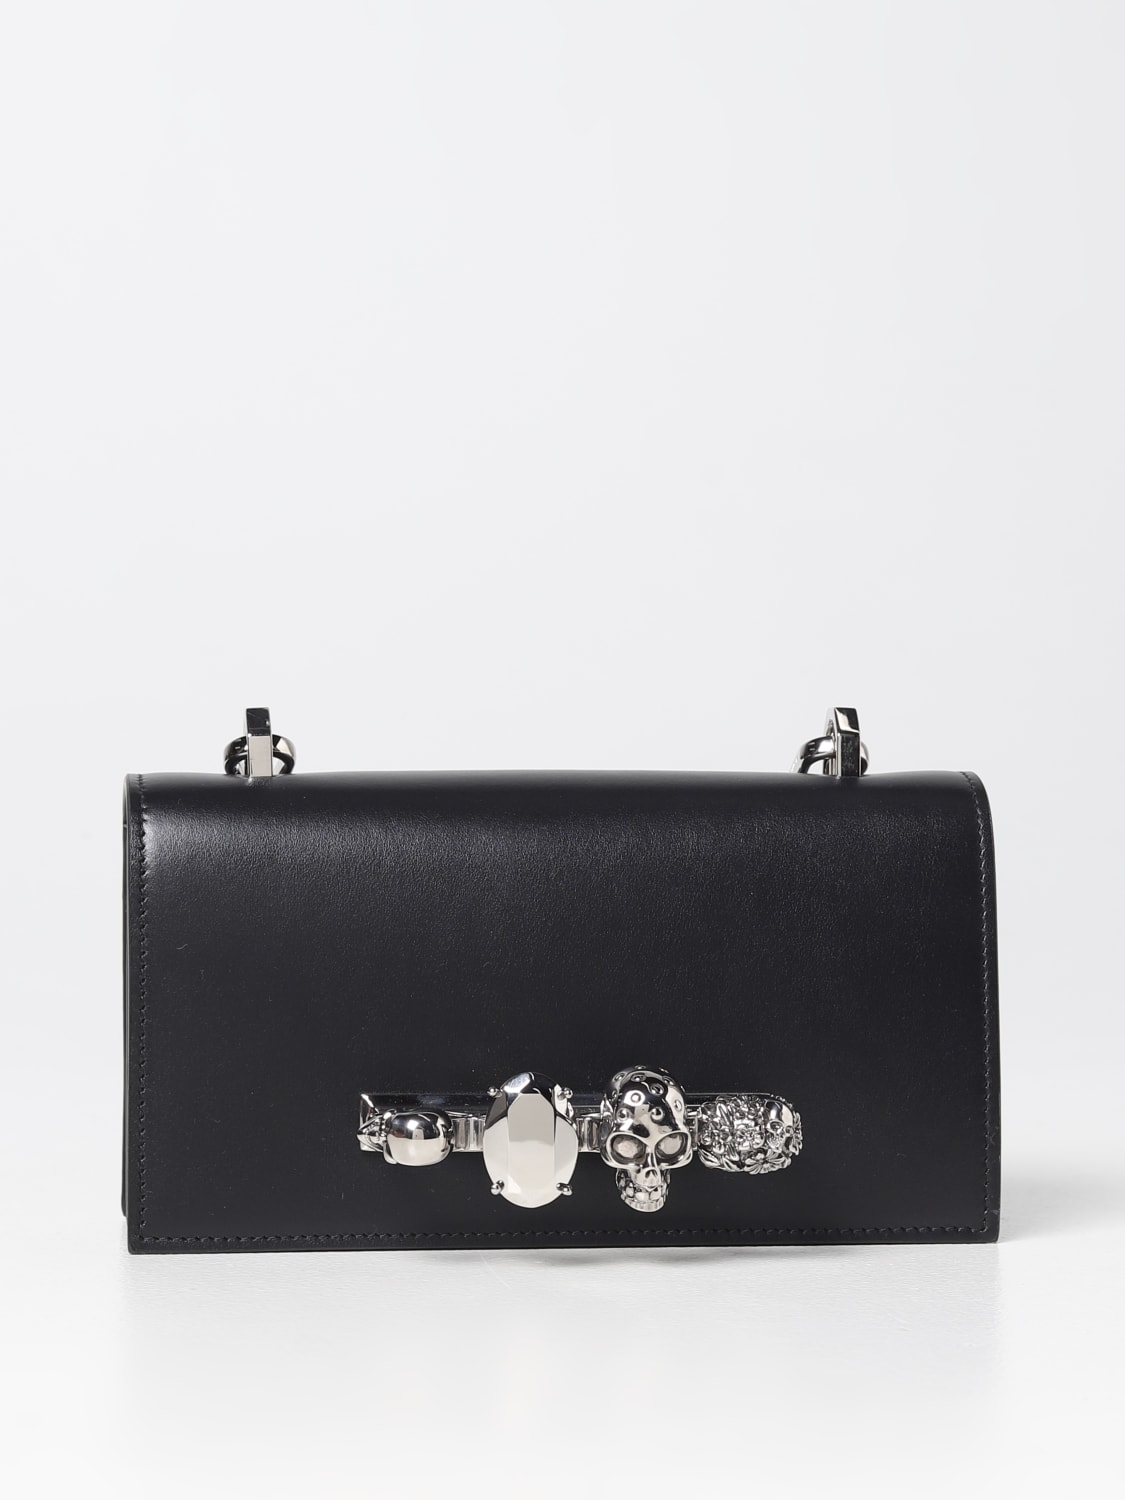 Alexander McQueen The Knuckle bag in leather